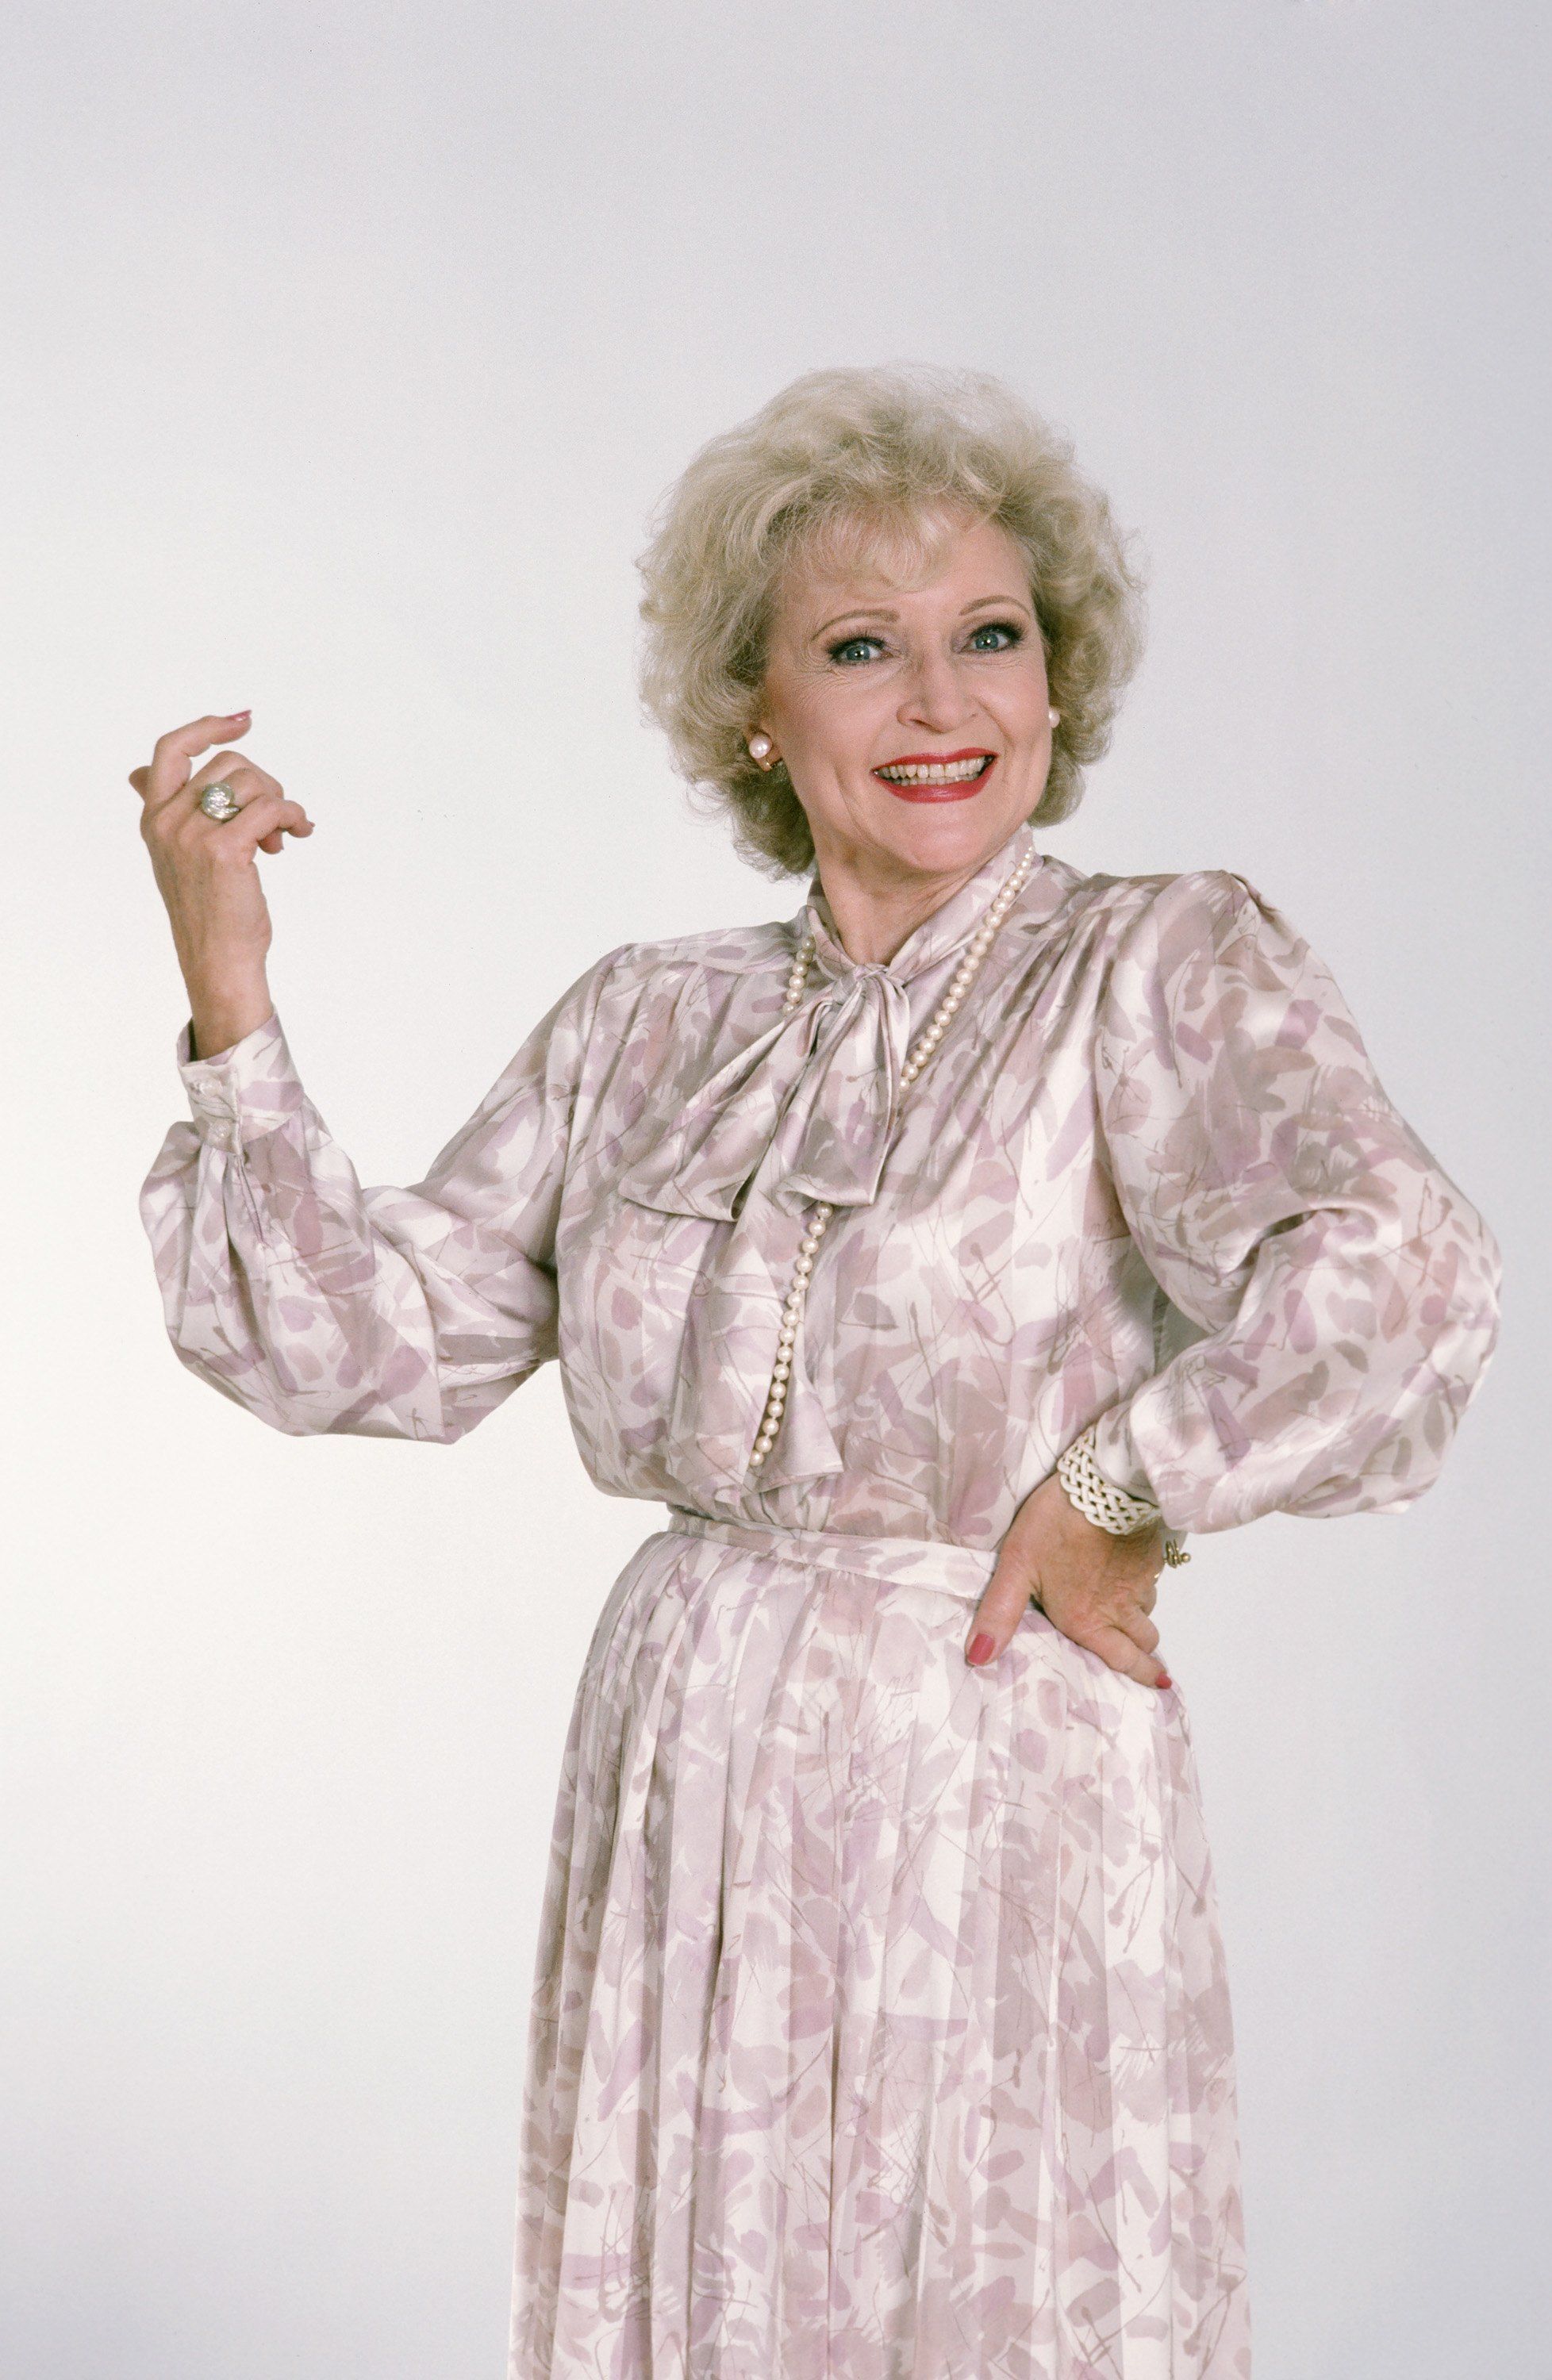 Betty White on Aging, Vodka Every Night and Being Fabulous in Her 90s